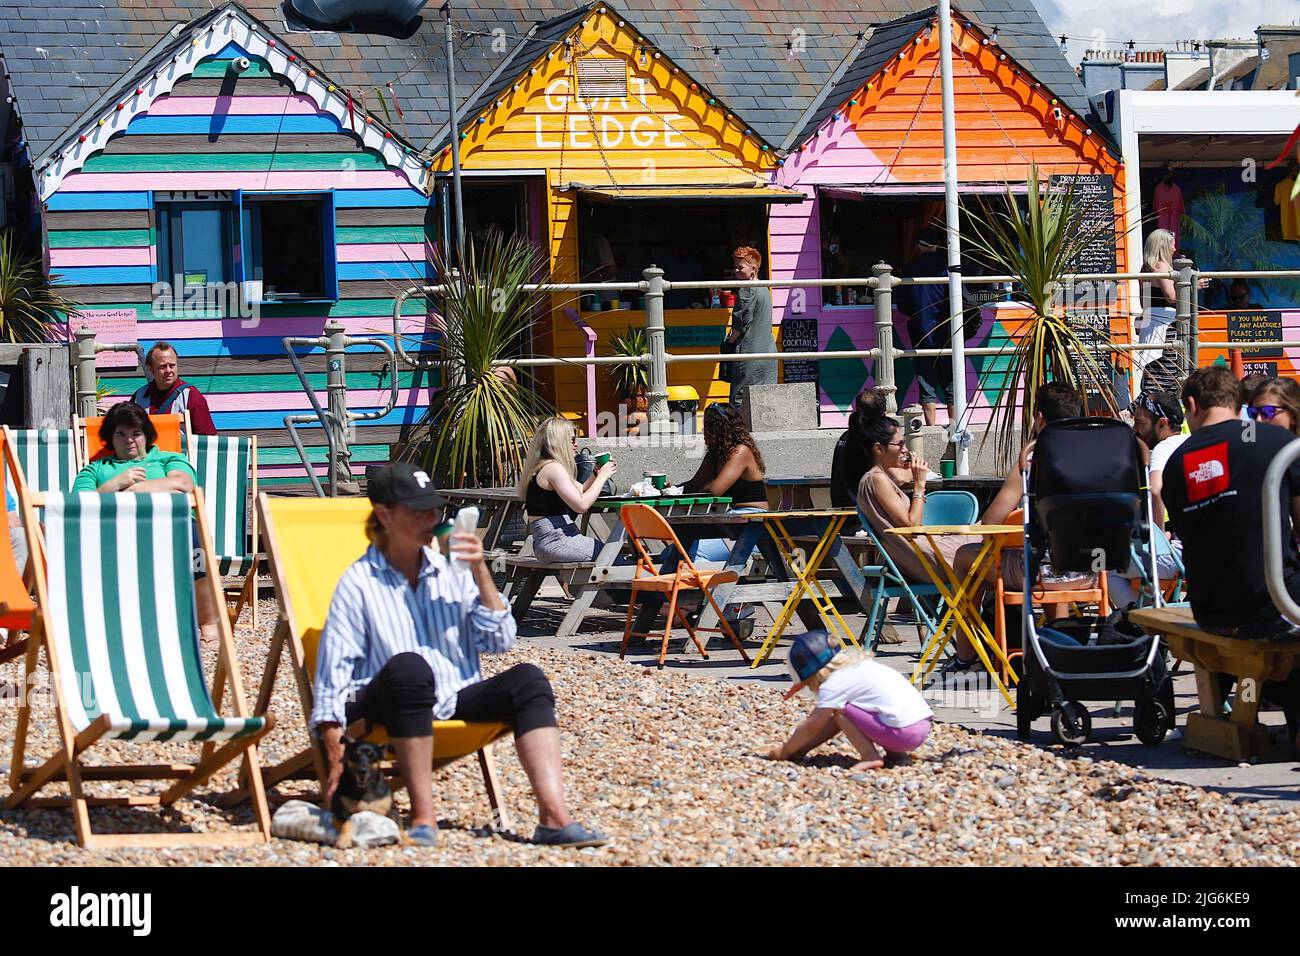 Hastings, East Sussex, UK. 08 Jul, 2022. UK Weather: Very hot and sunny at the seaside town of Hastings in East Sussex as Brits enjoy the very hot weather today and is expected to reach 29c in some parts of the UK. Busy seaside cafe. Photo Credit: Paul Lawrenson /Alamy Live News Stock Photo